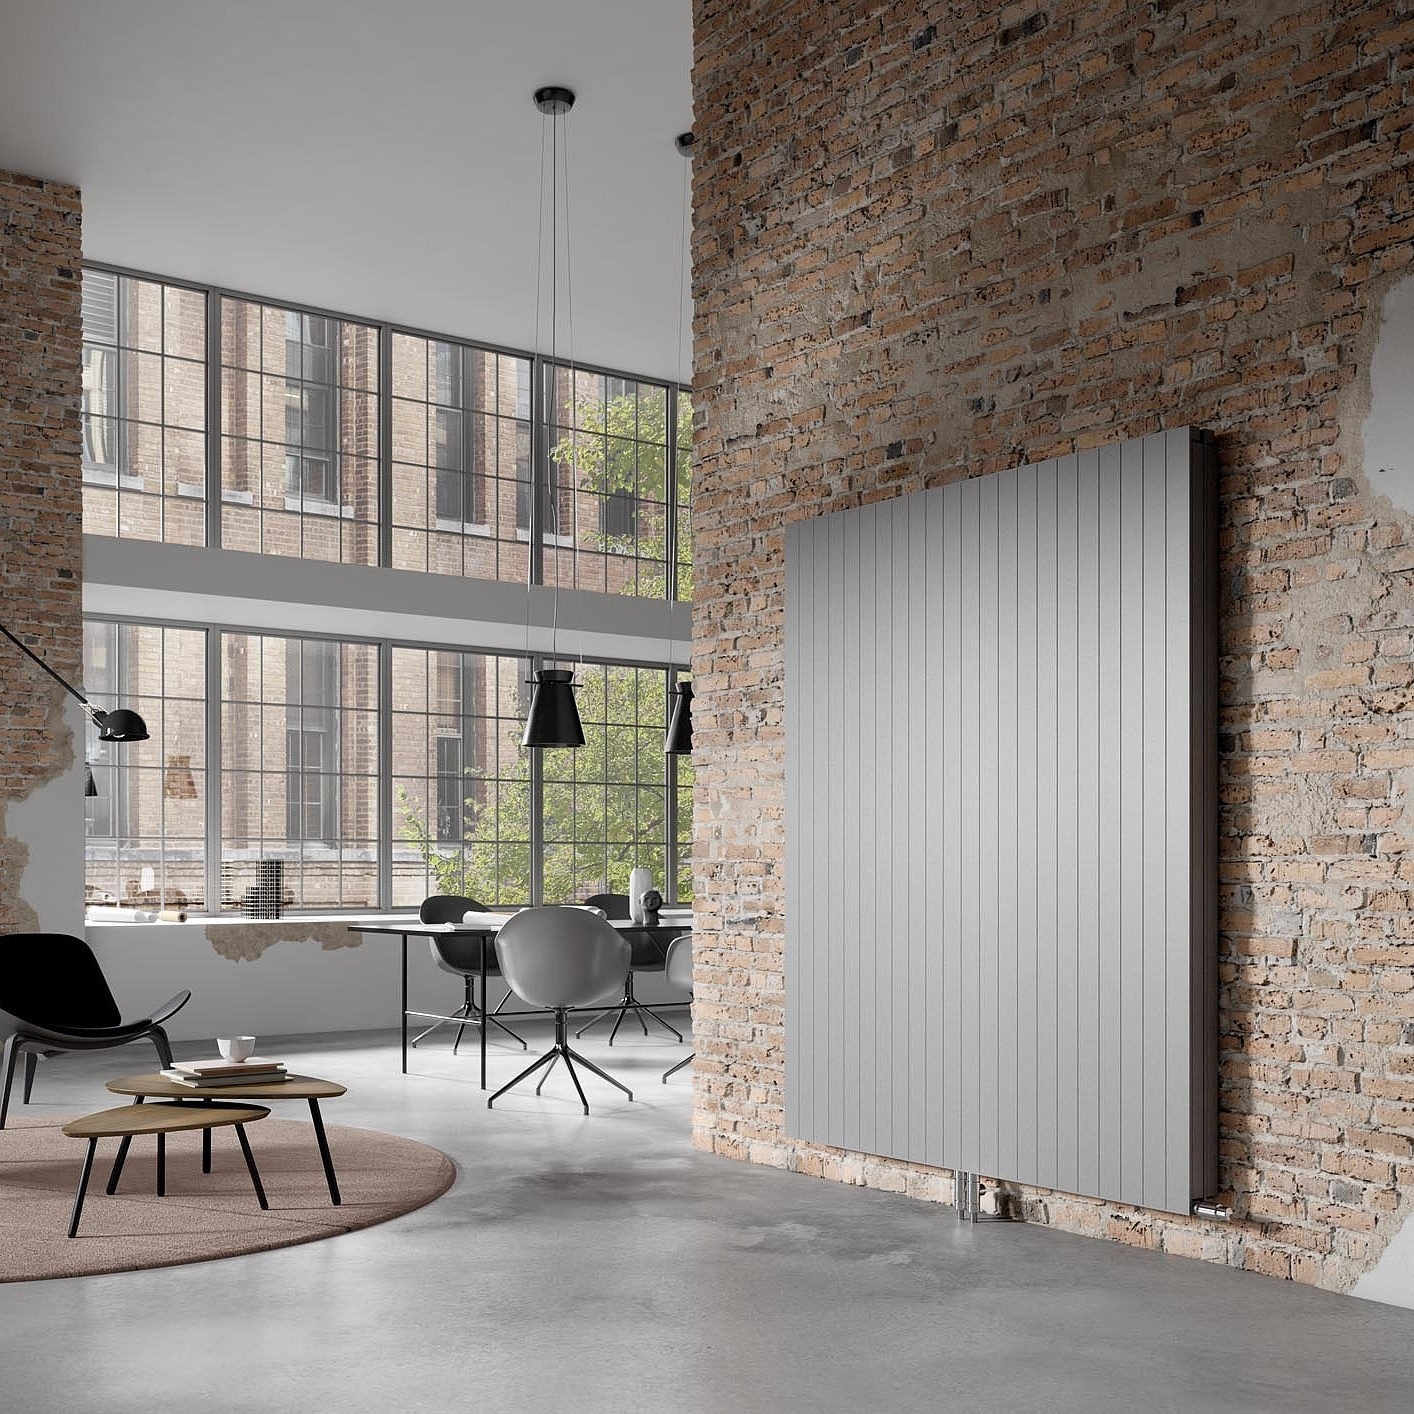 Kermi valve heating panel – for discerning looks and ultimate thermal comfort.